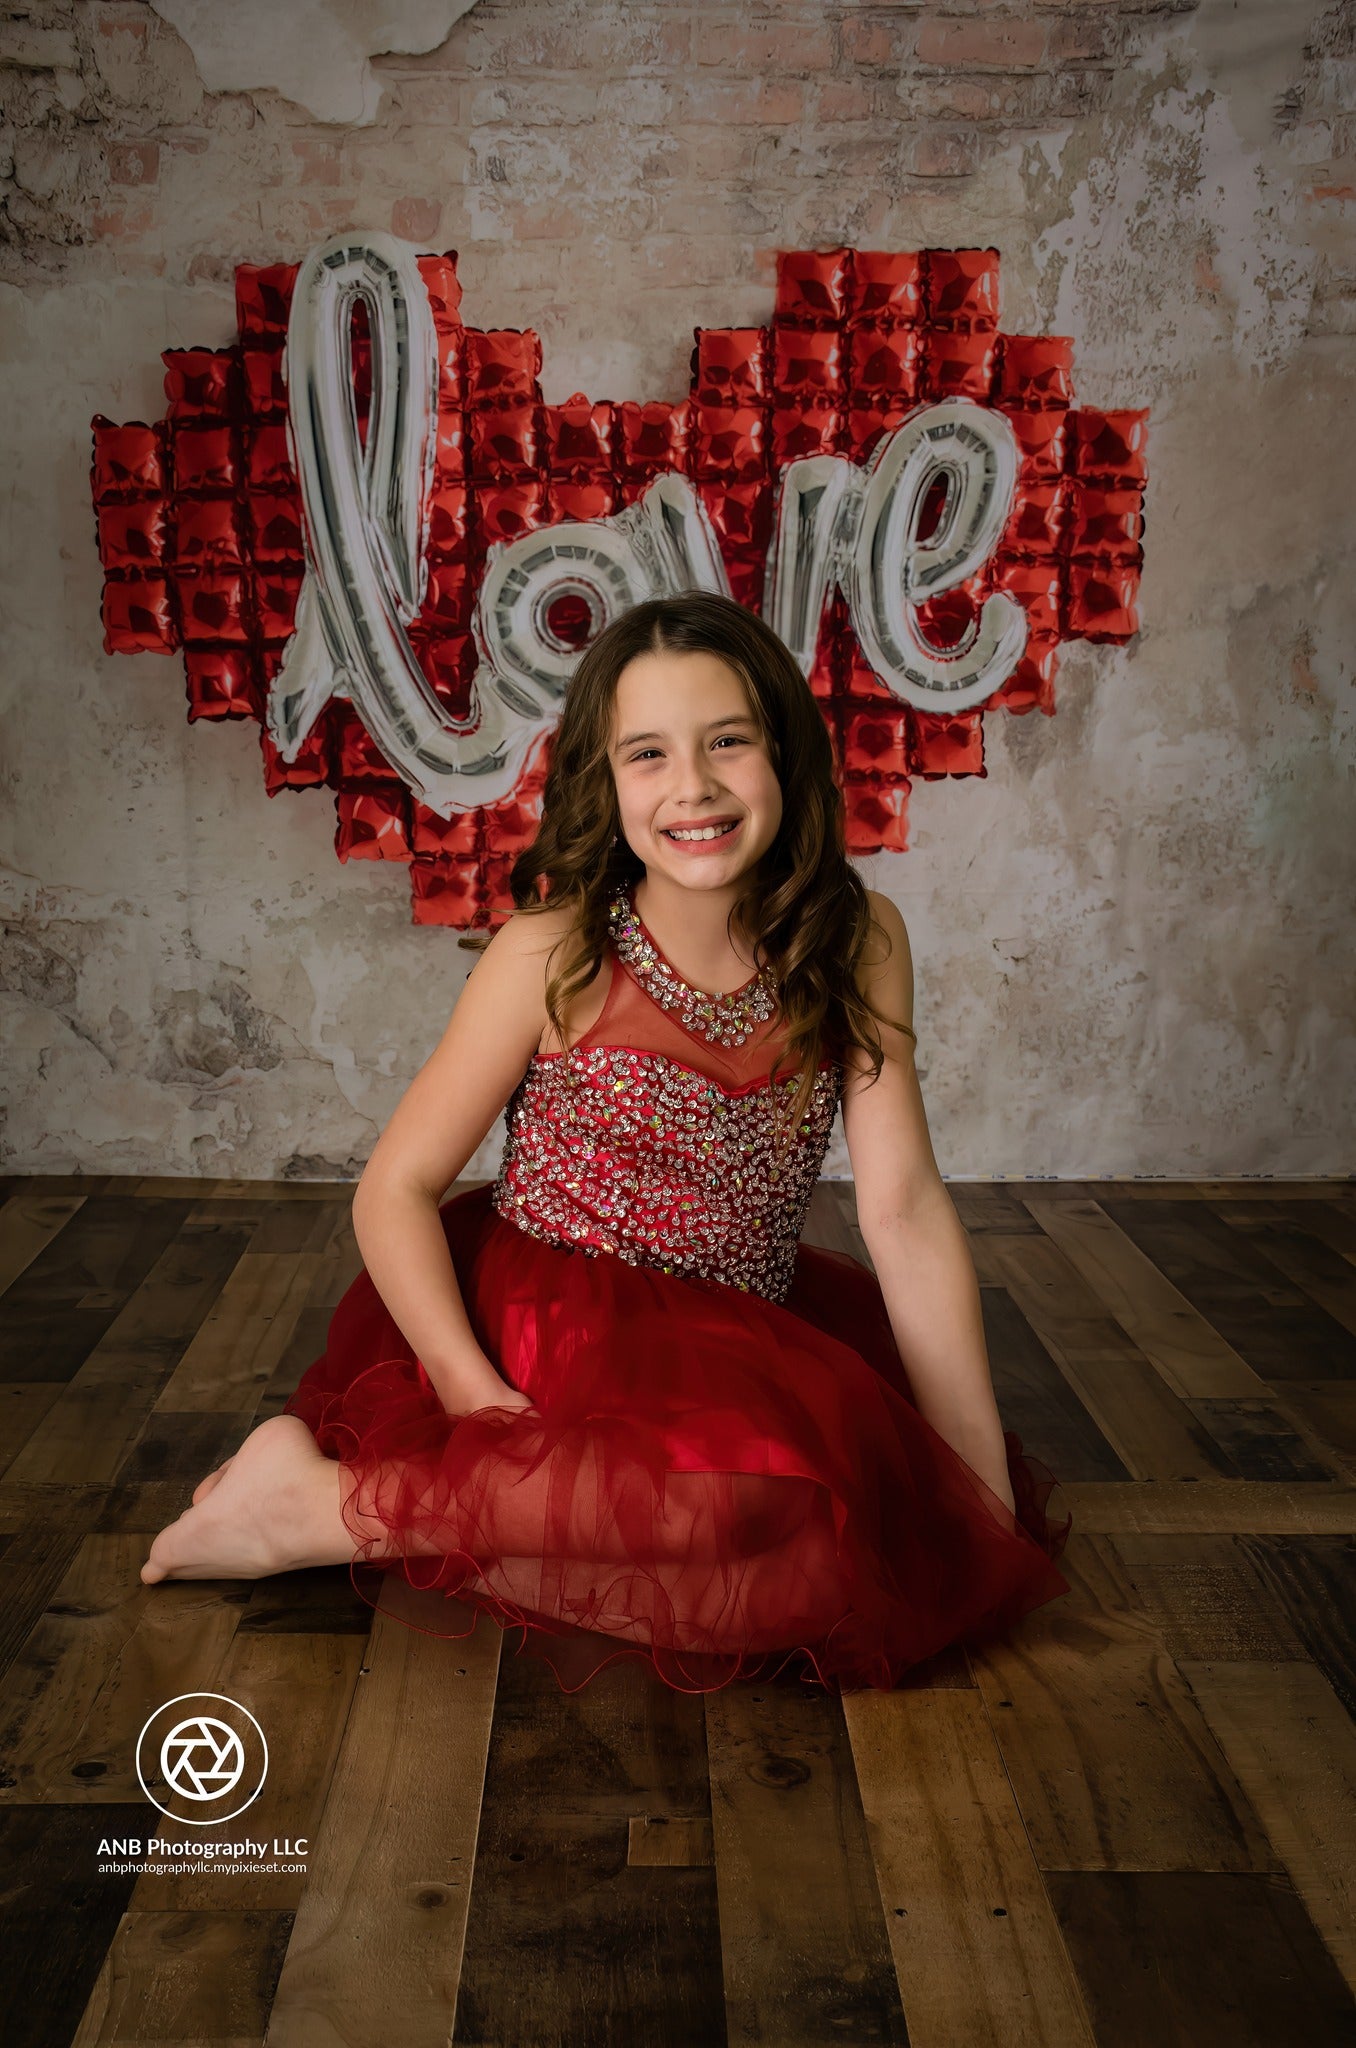 Kate Valentine's Day Love Wall Backdrop for Photography